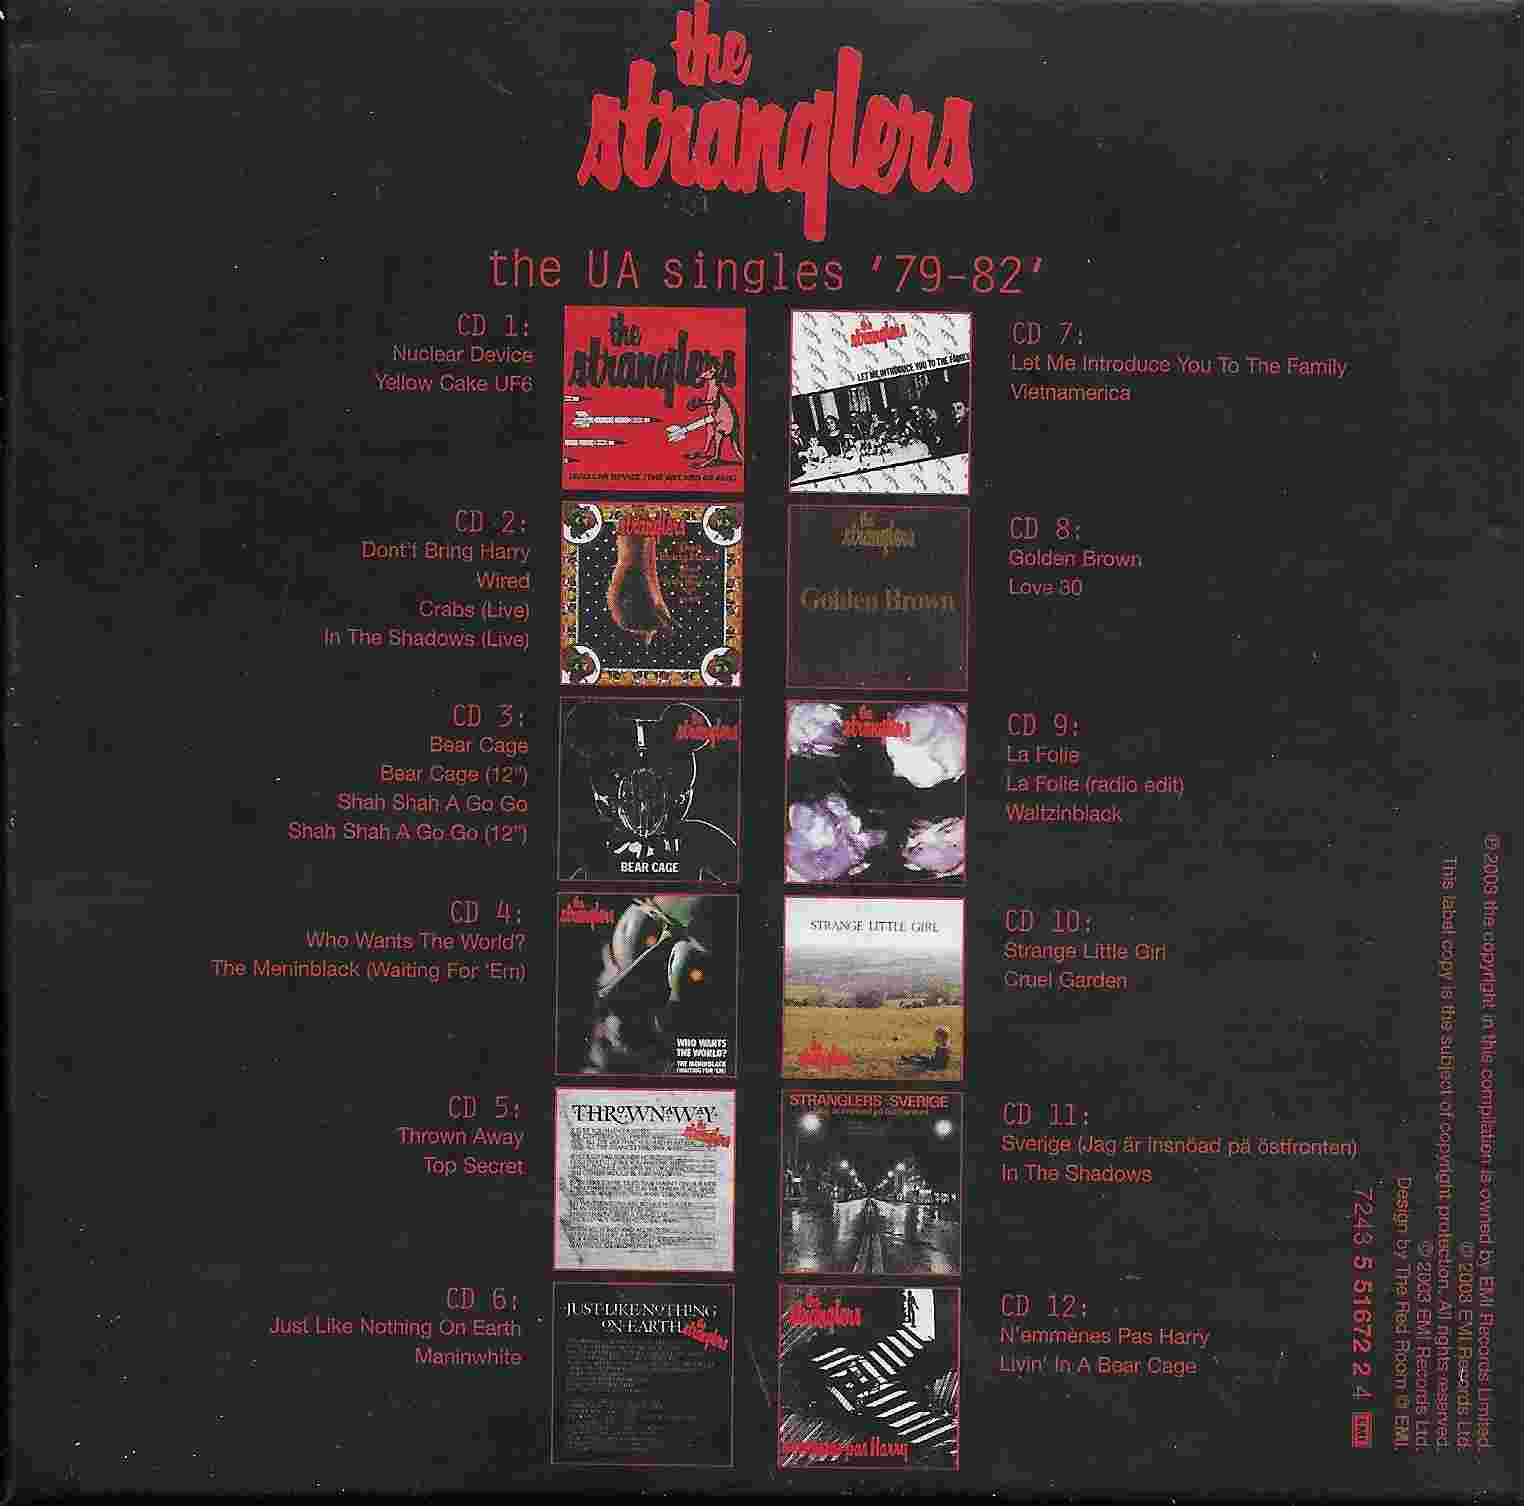 Picture of 559672 2 The UA singles 1980-1982 by artist The Stranglers  from The Stranglers